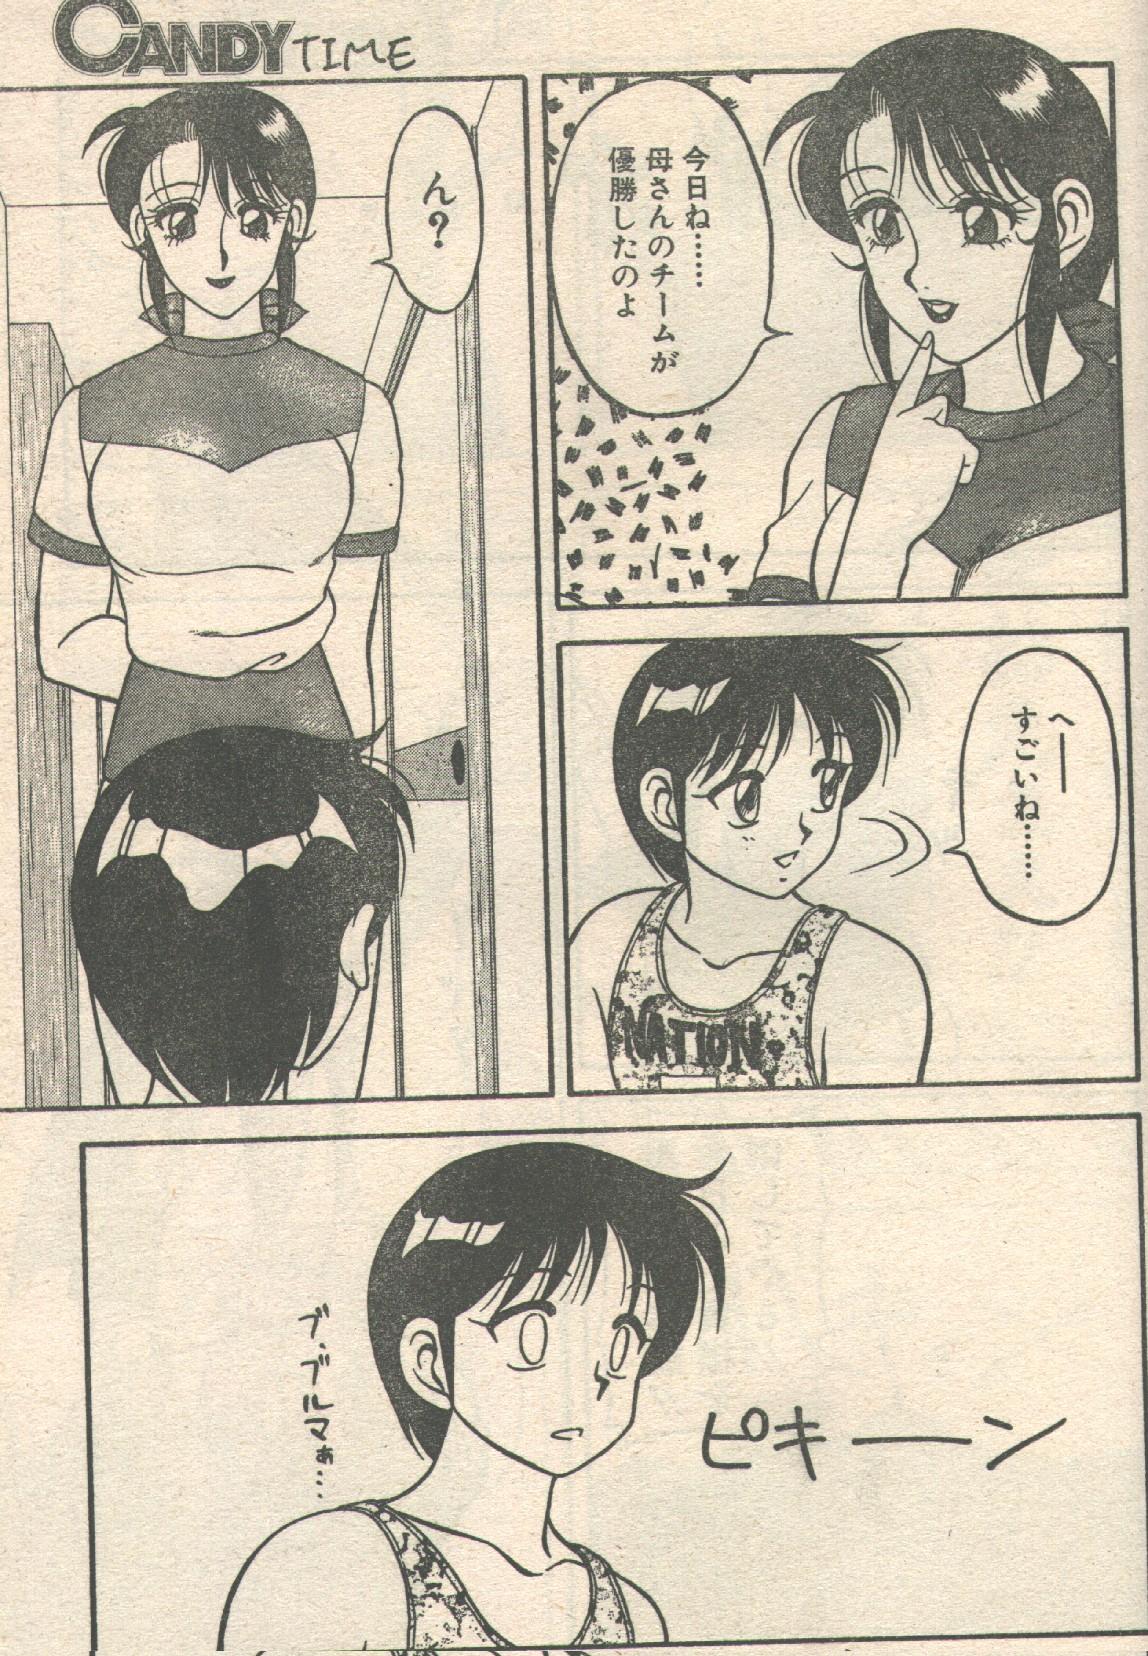 Candy Time 1992-09 [Incomplete] キャンディータイム 1992年09月号 [不完全]